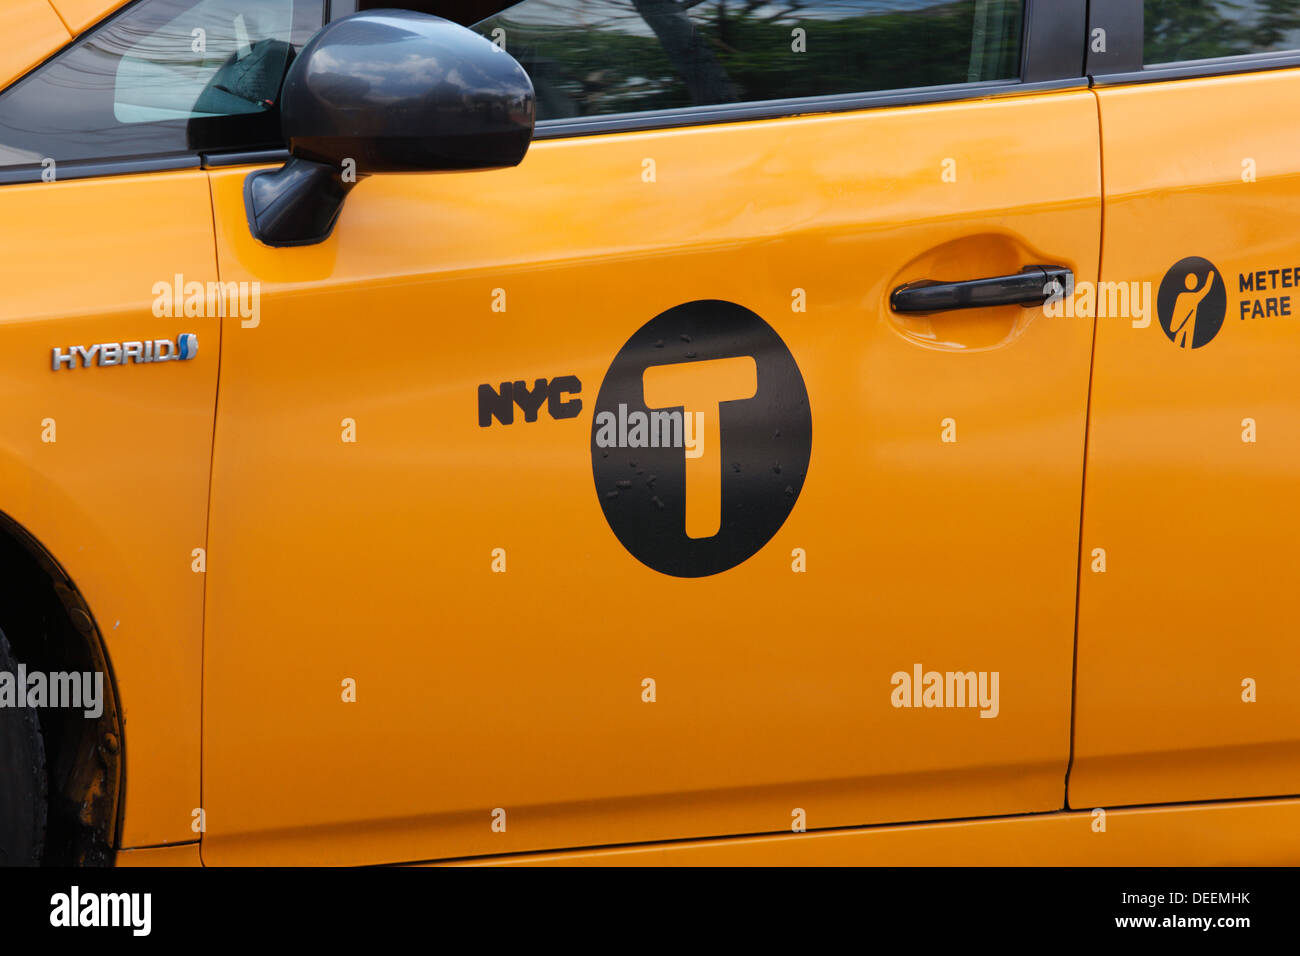 Taxi in New York City, New York, USA. Stock Photo